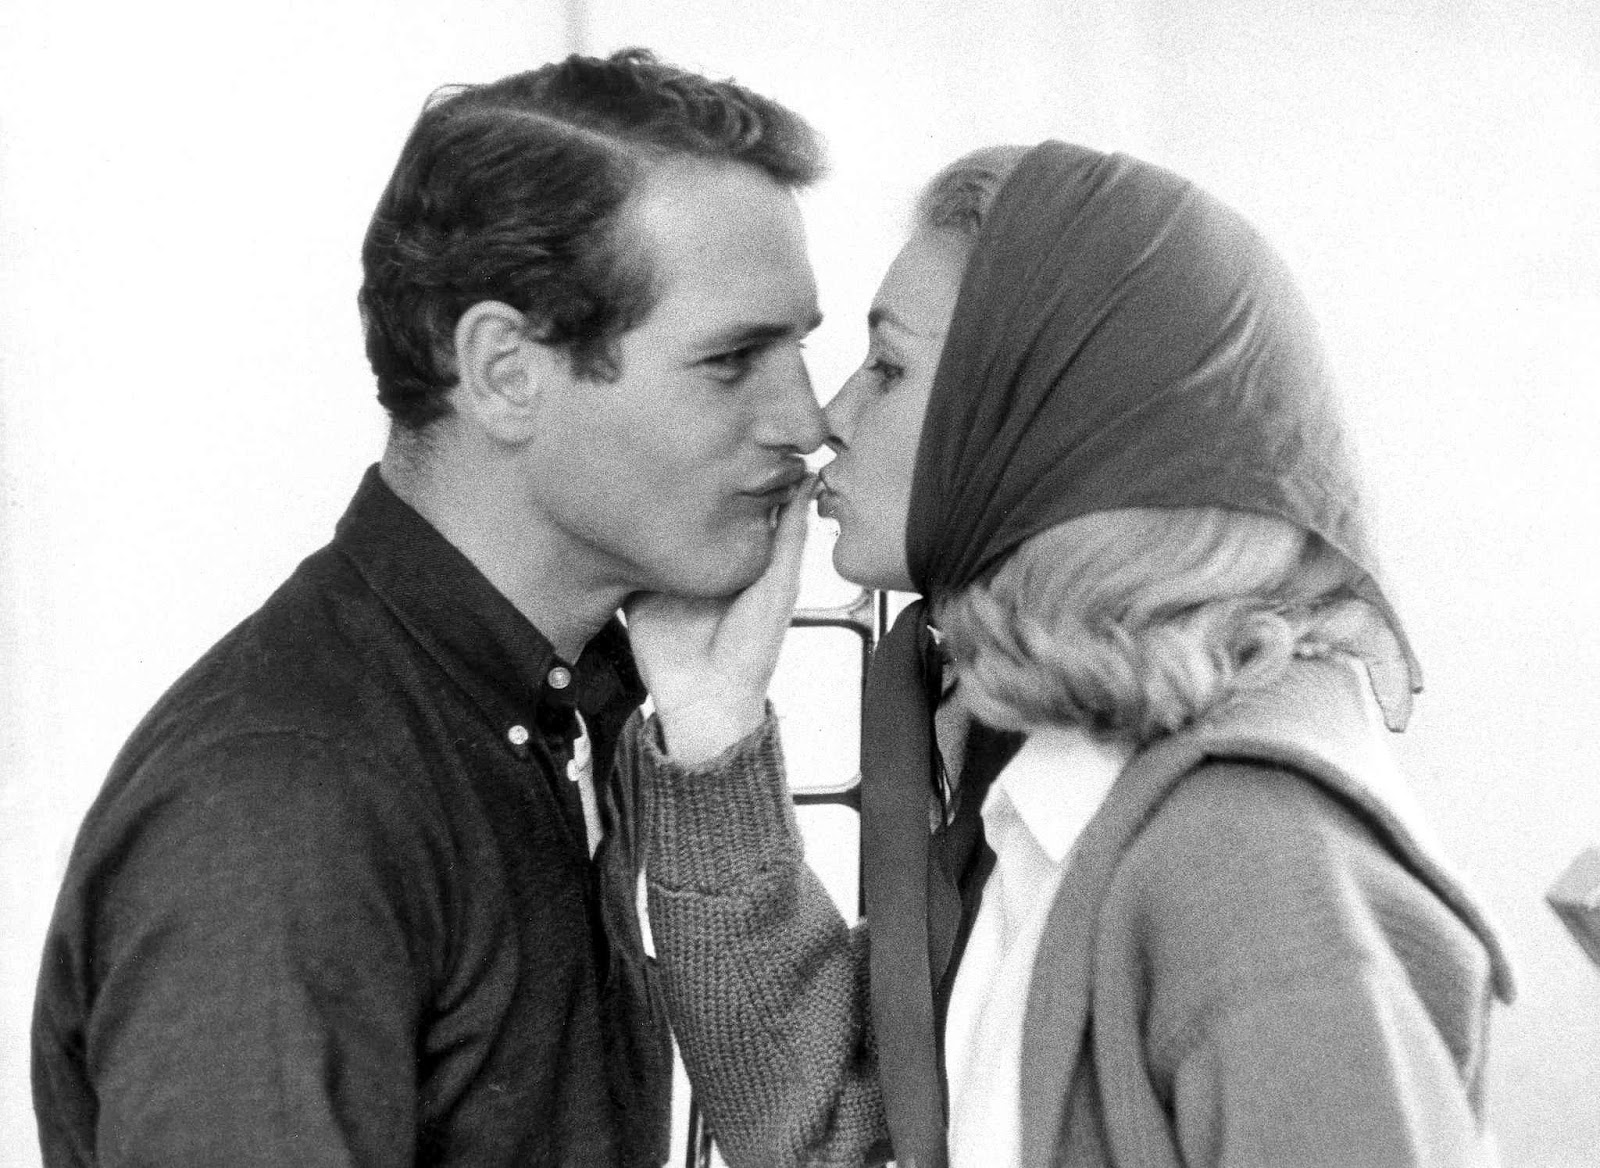 Paul Newman with a girl.